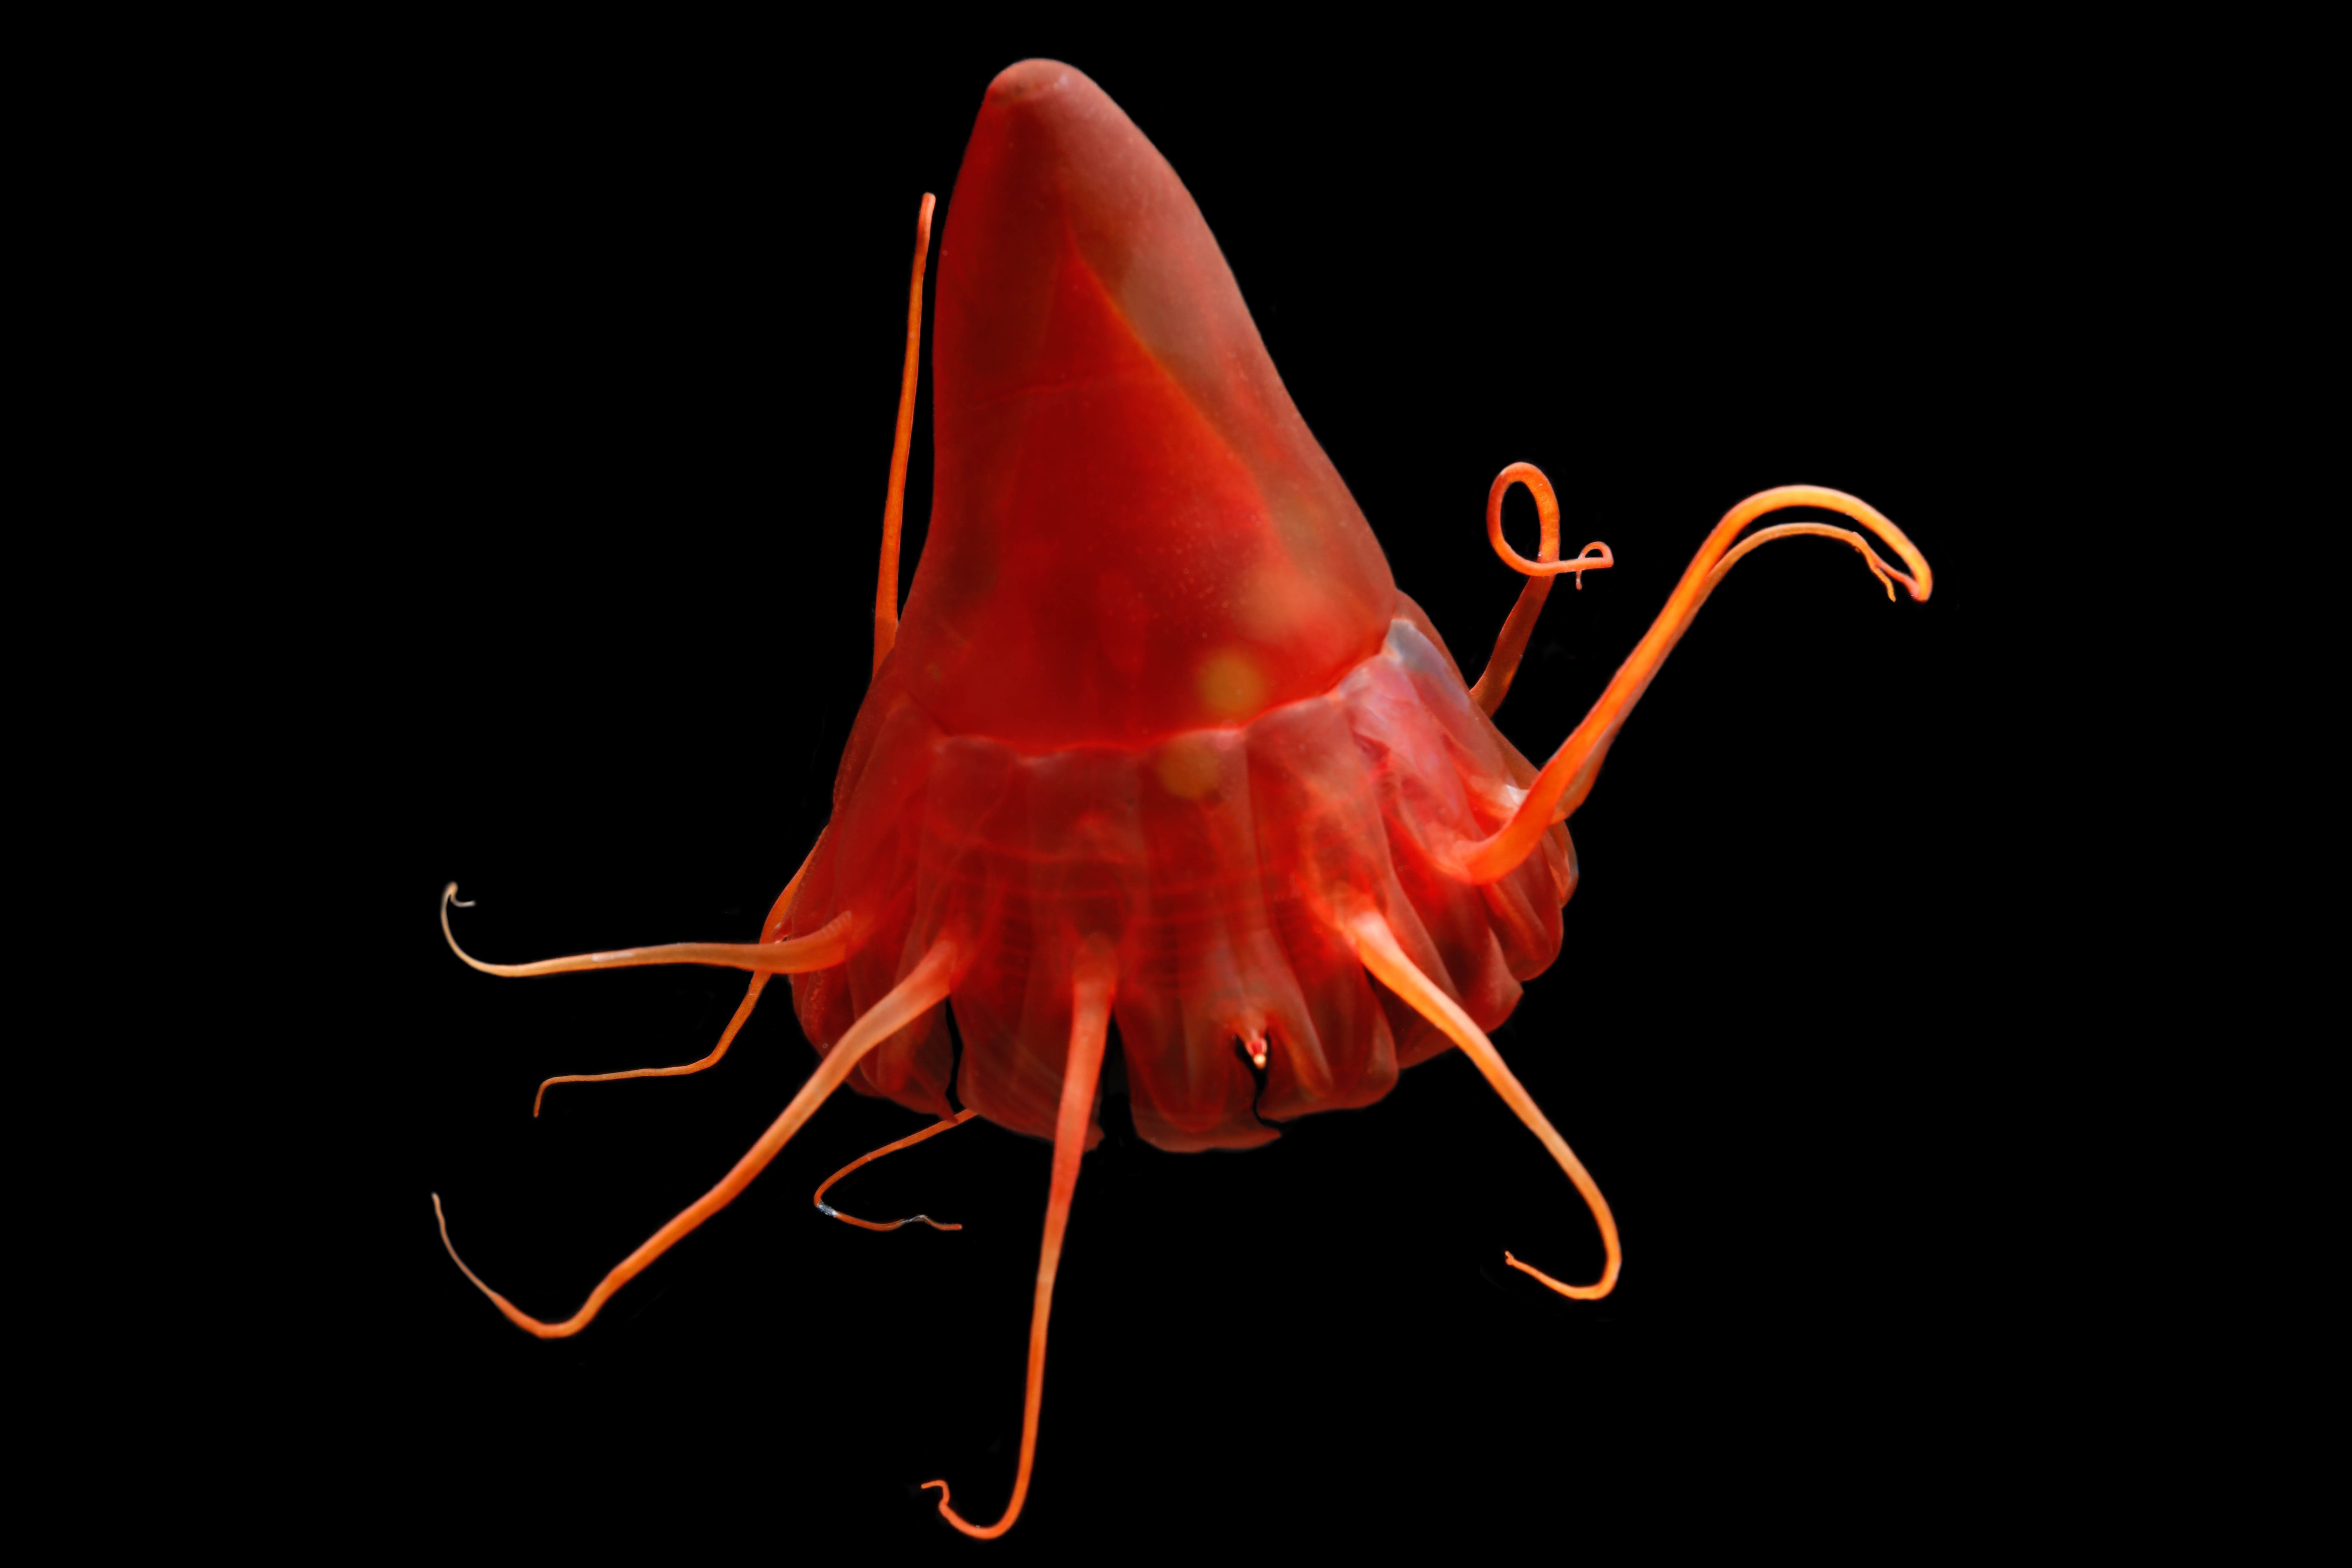 Experimental mining plumes and ocean warming trigger stress in a deep pelagic jellyfish